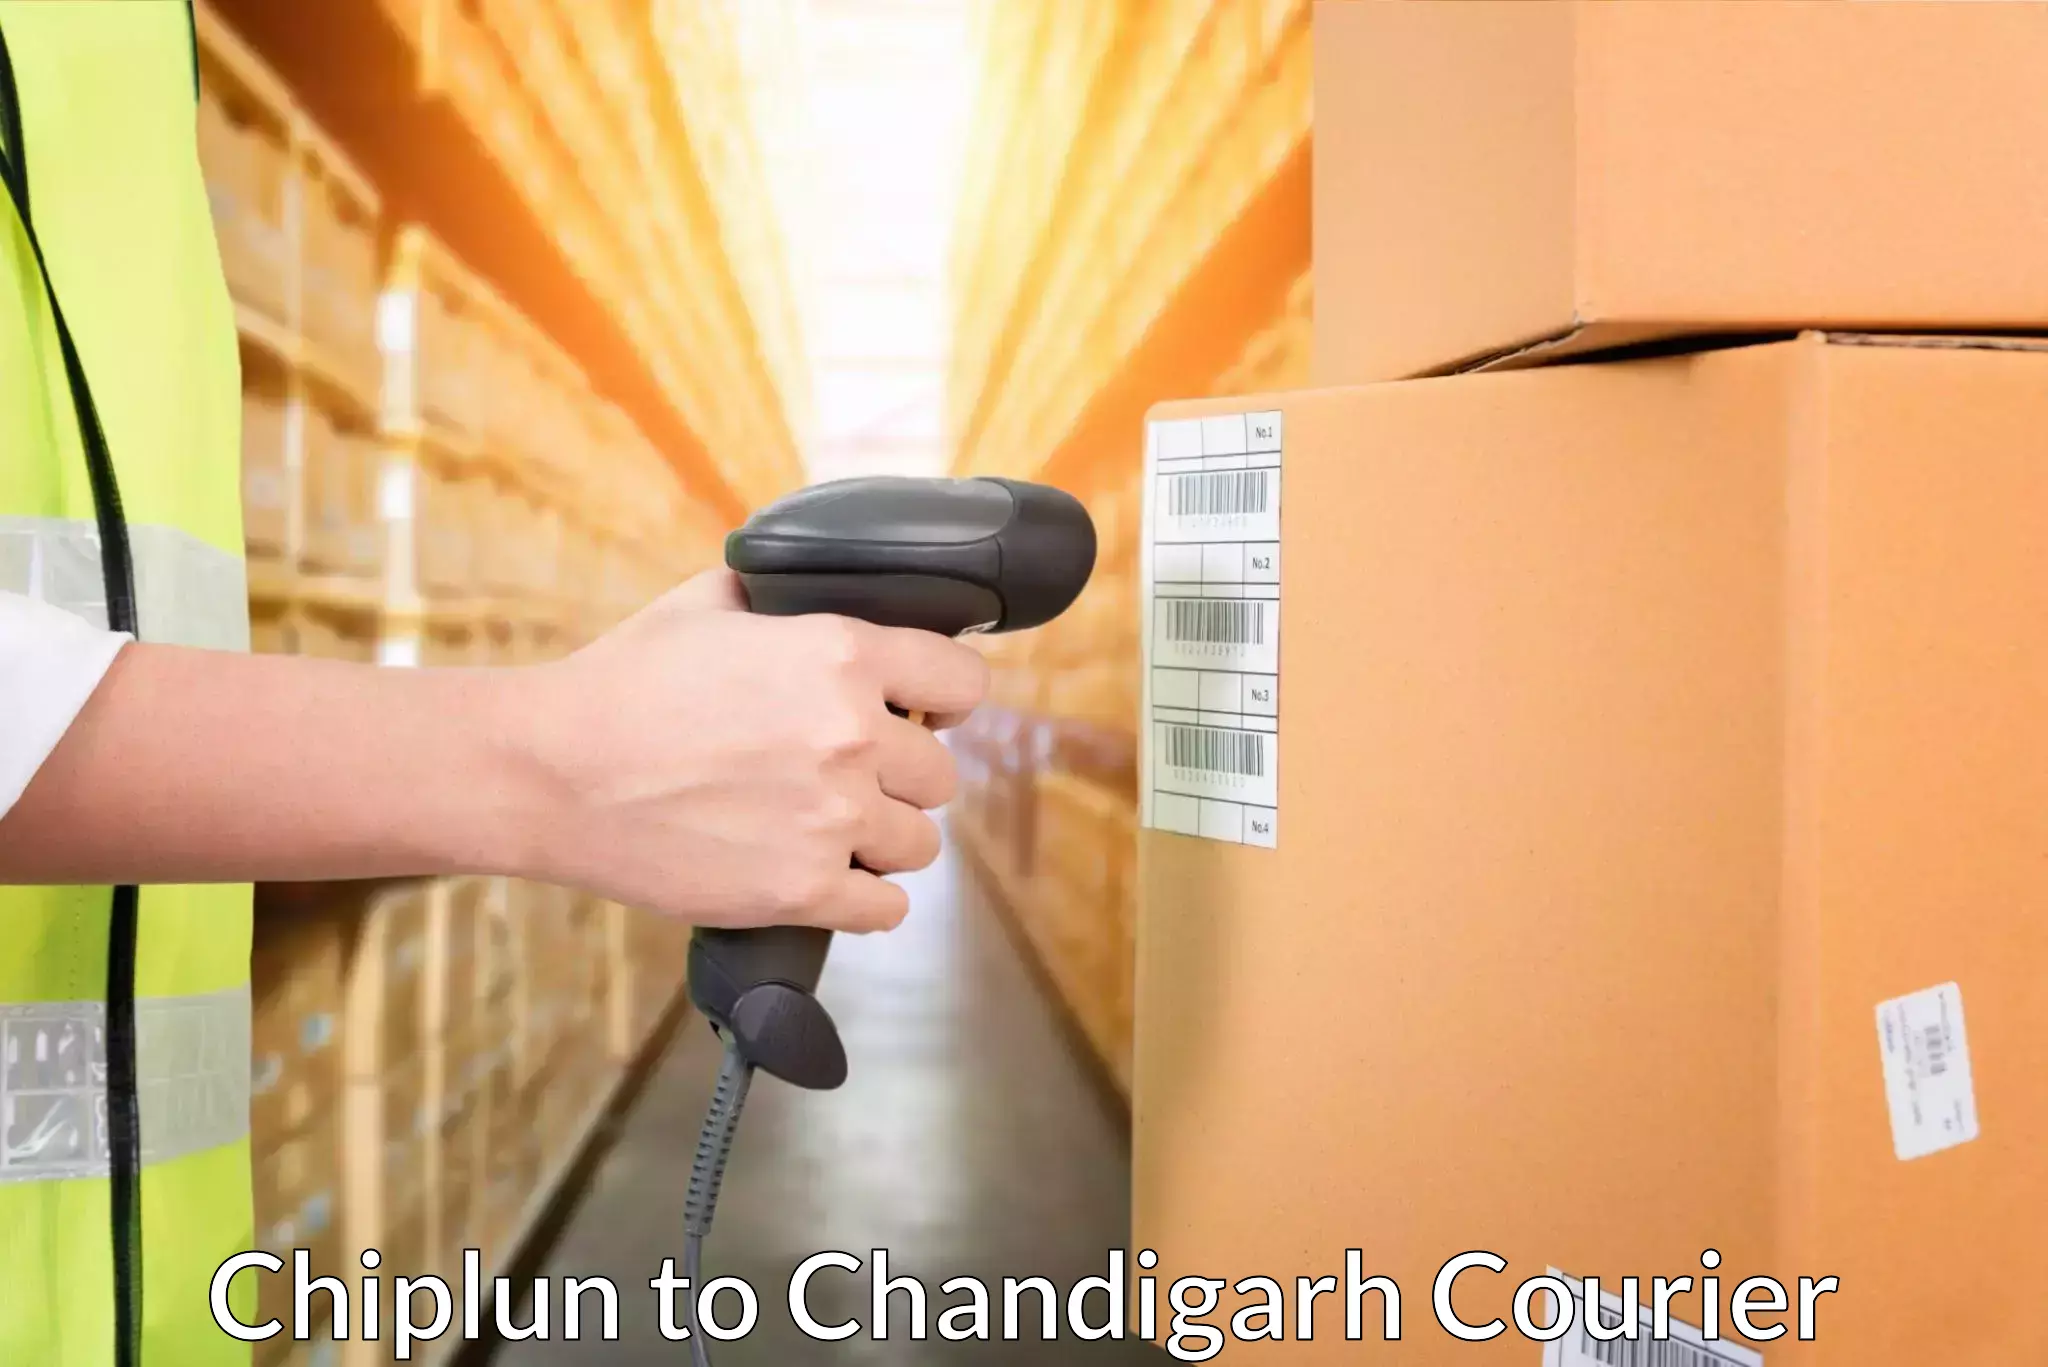 Courier service innovation in Chiplun to Chandigarh